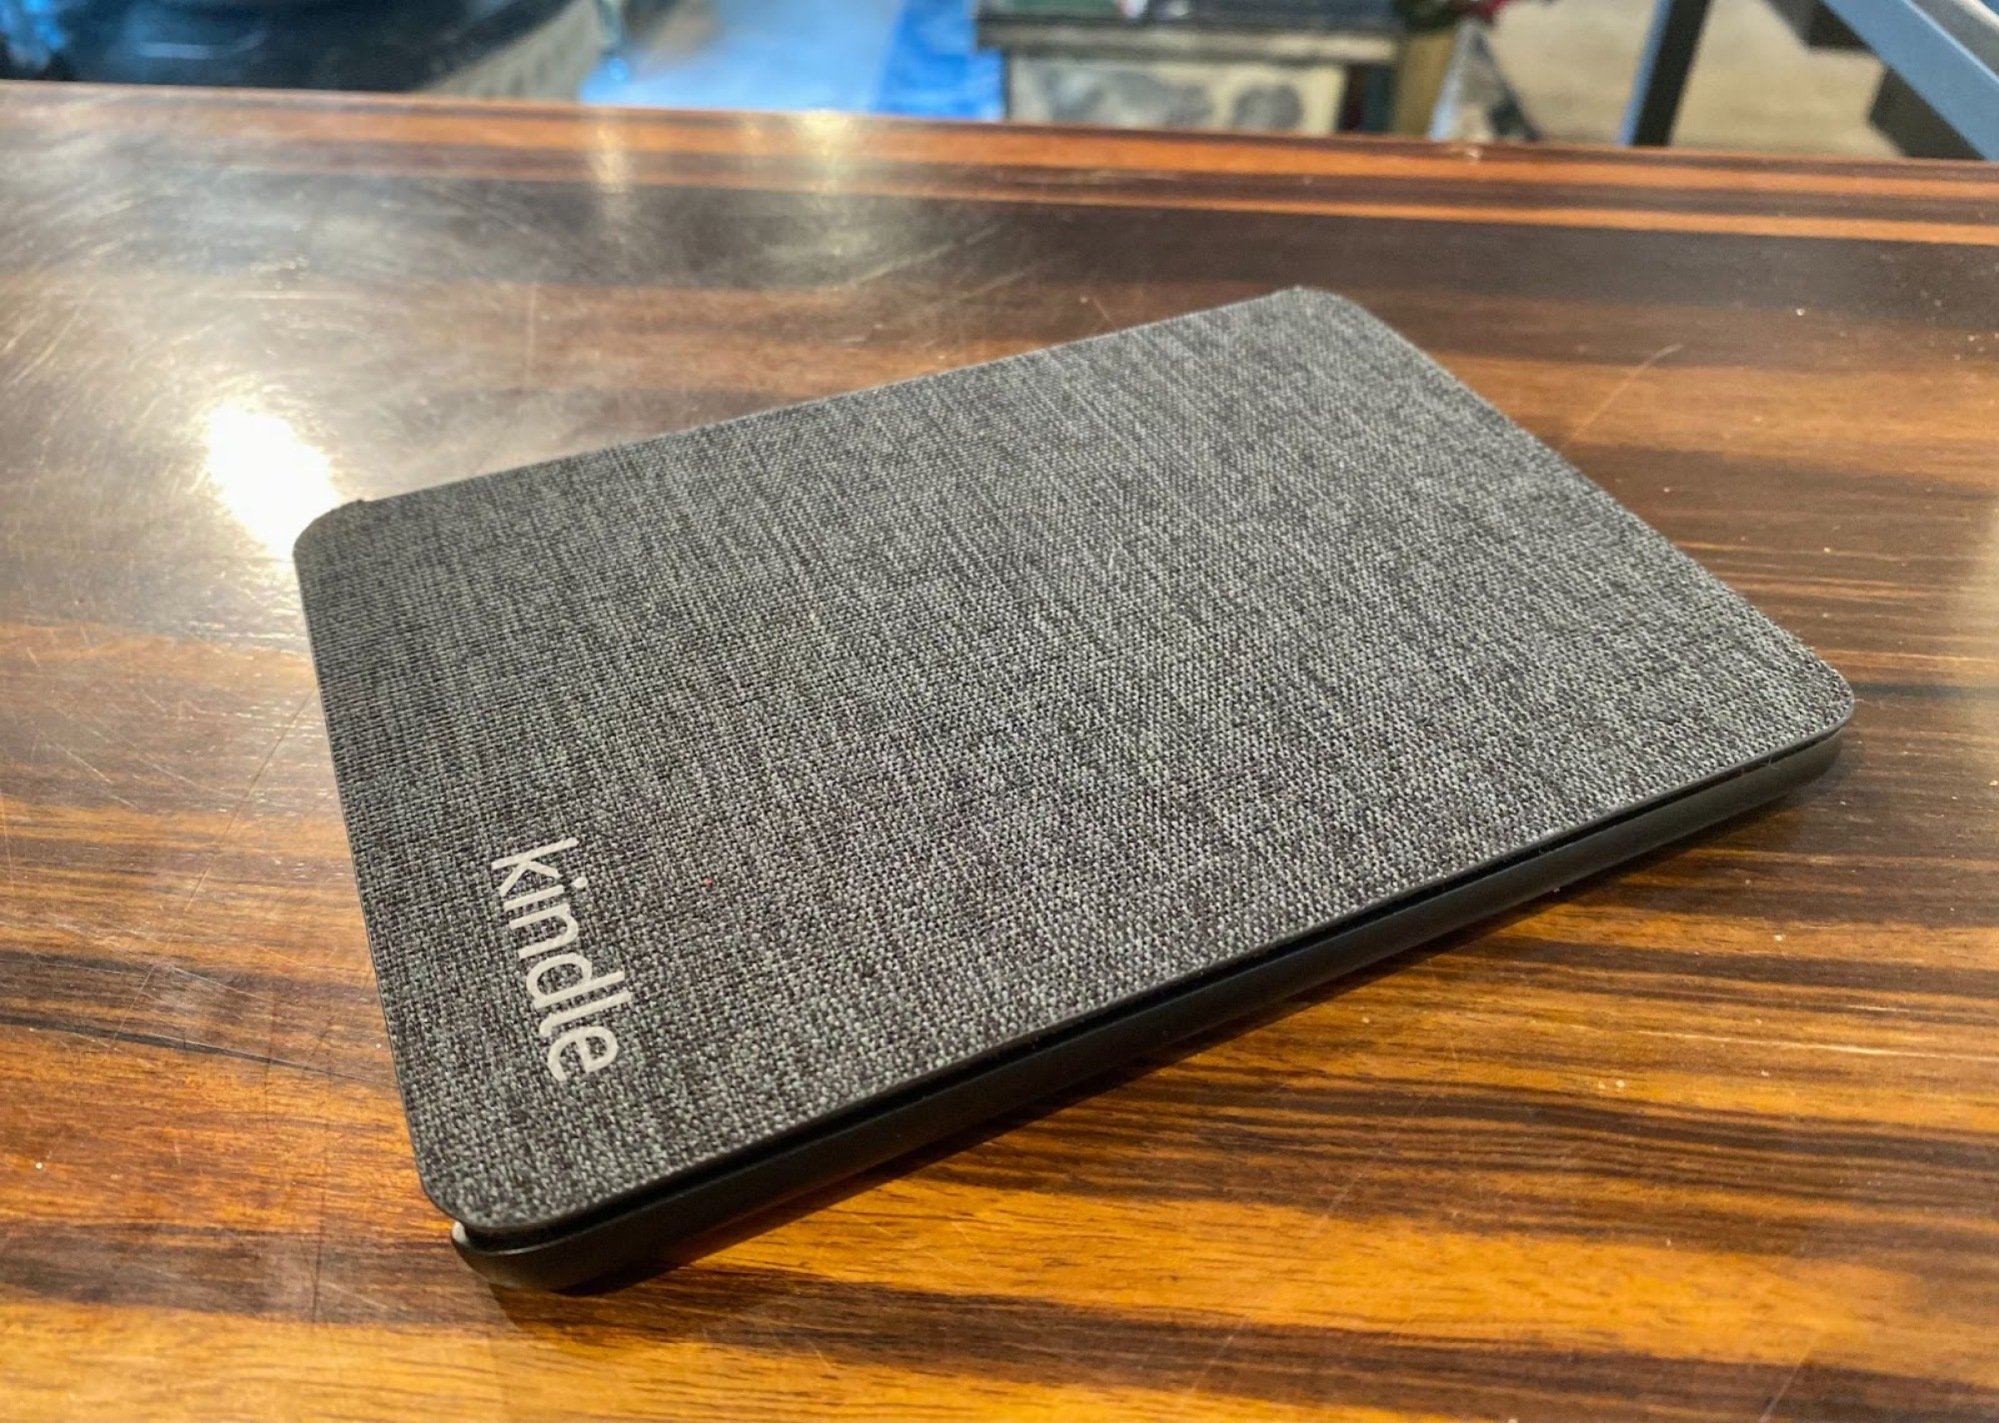 kindle with gray fabric cover